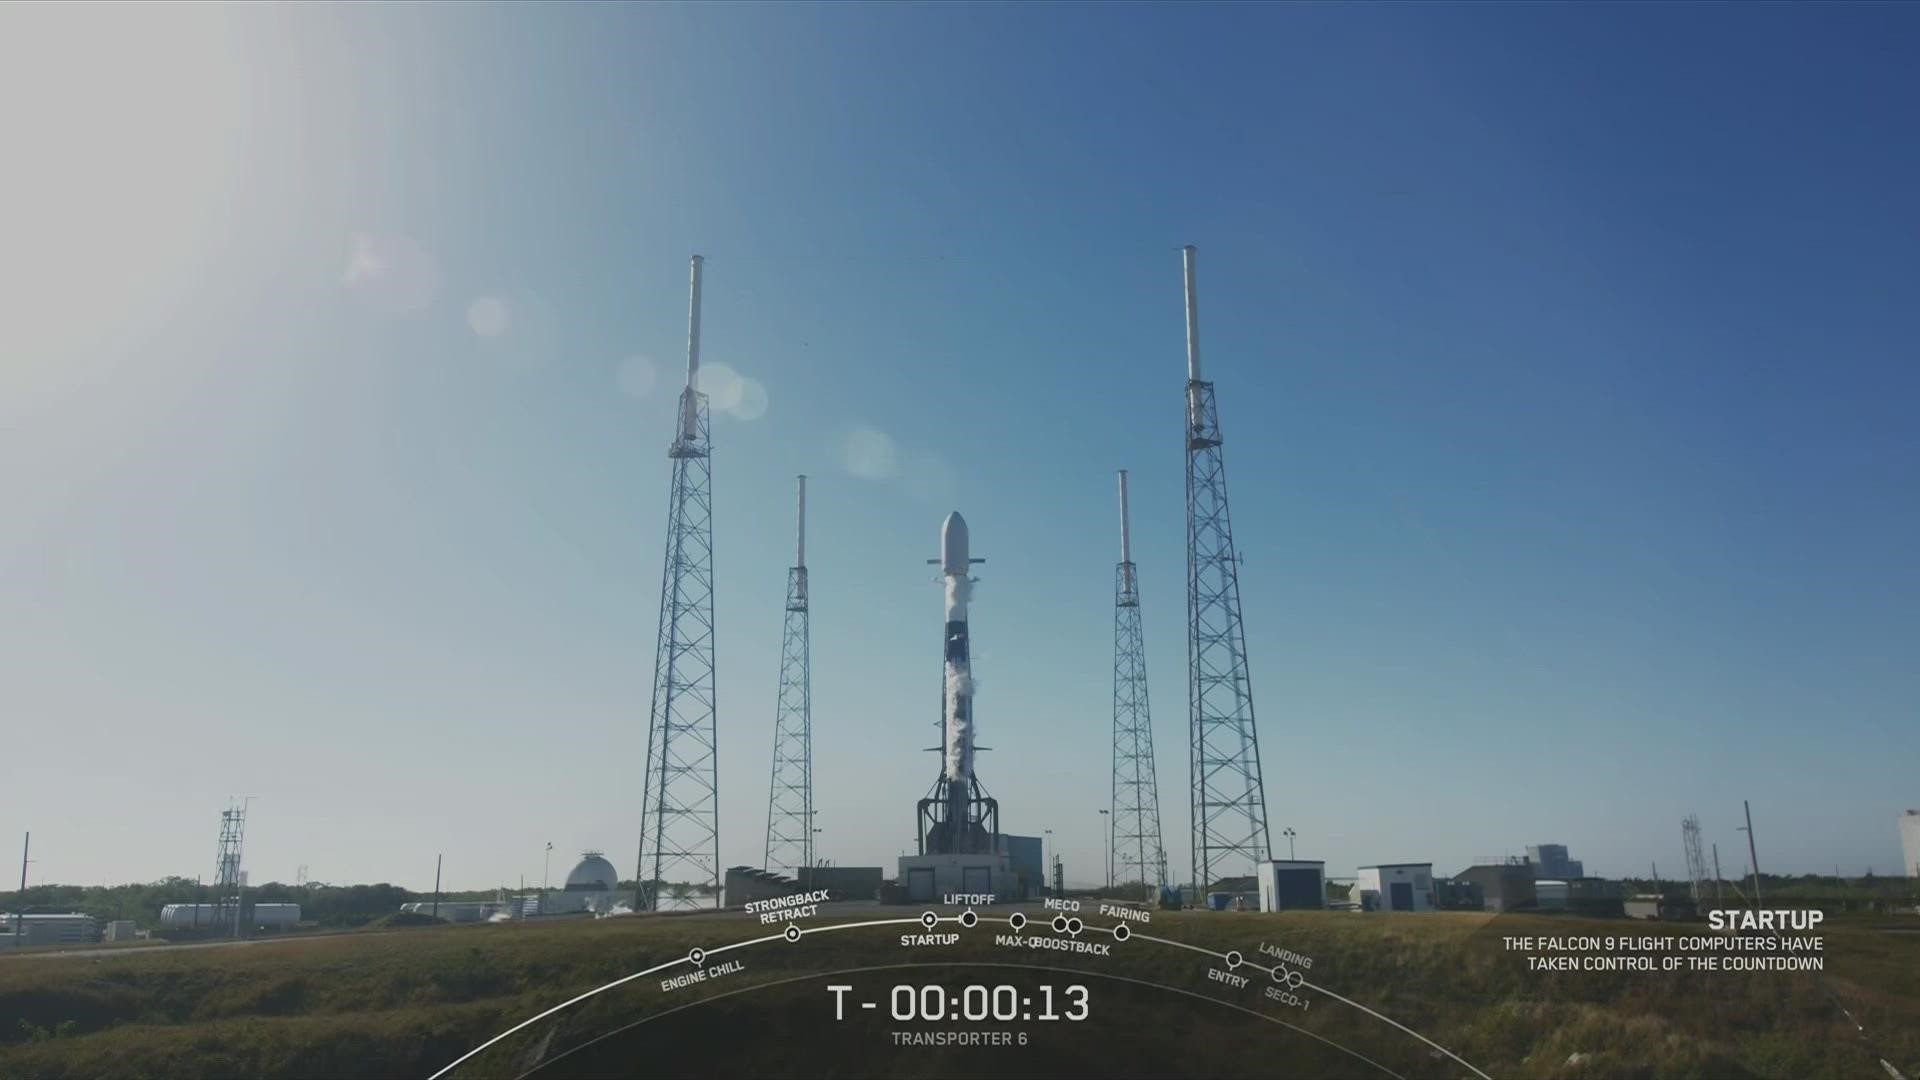 SpaceX is targeting 9:56 a.m. for Falcon 9’s launch of the Transporter-6 mission.